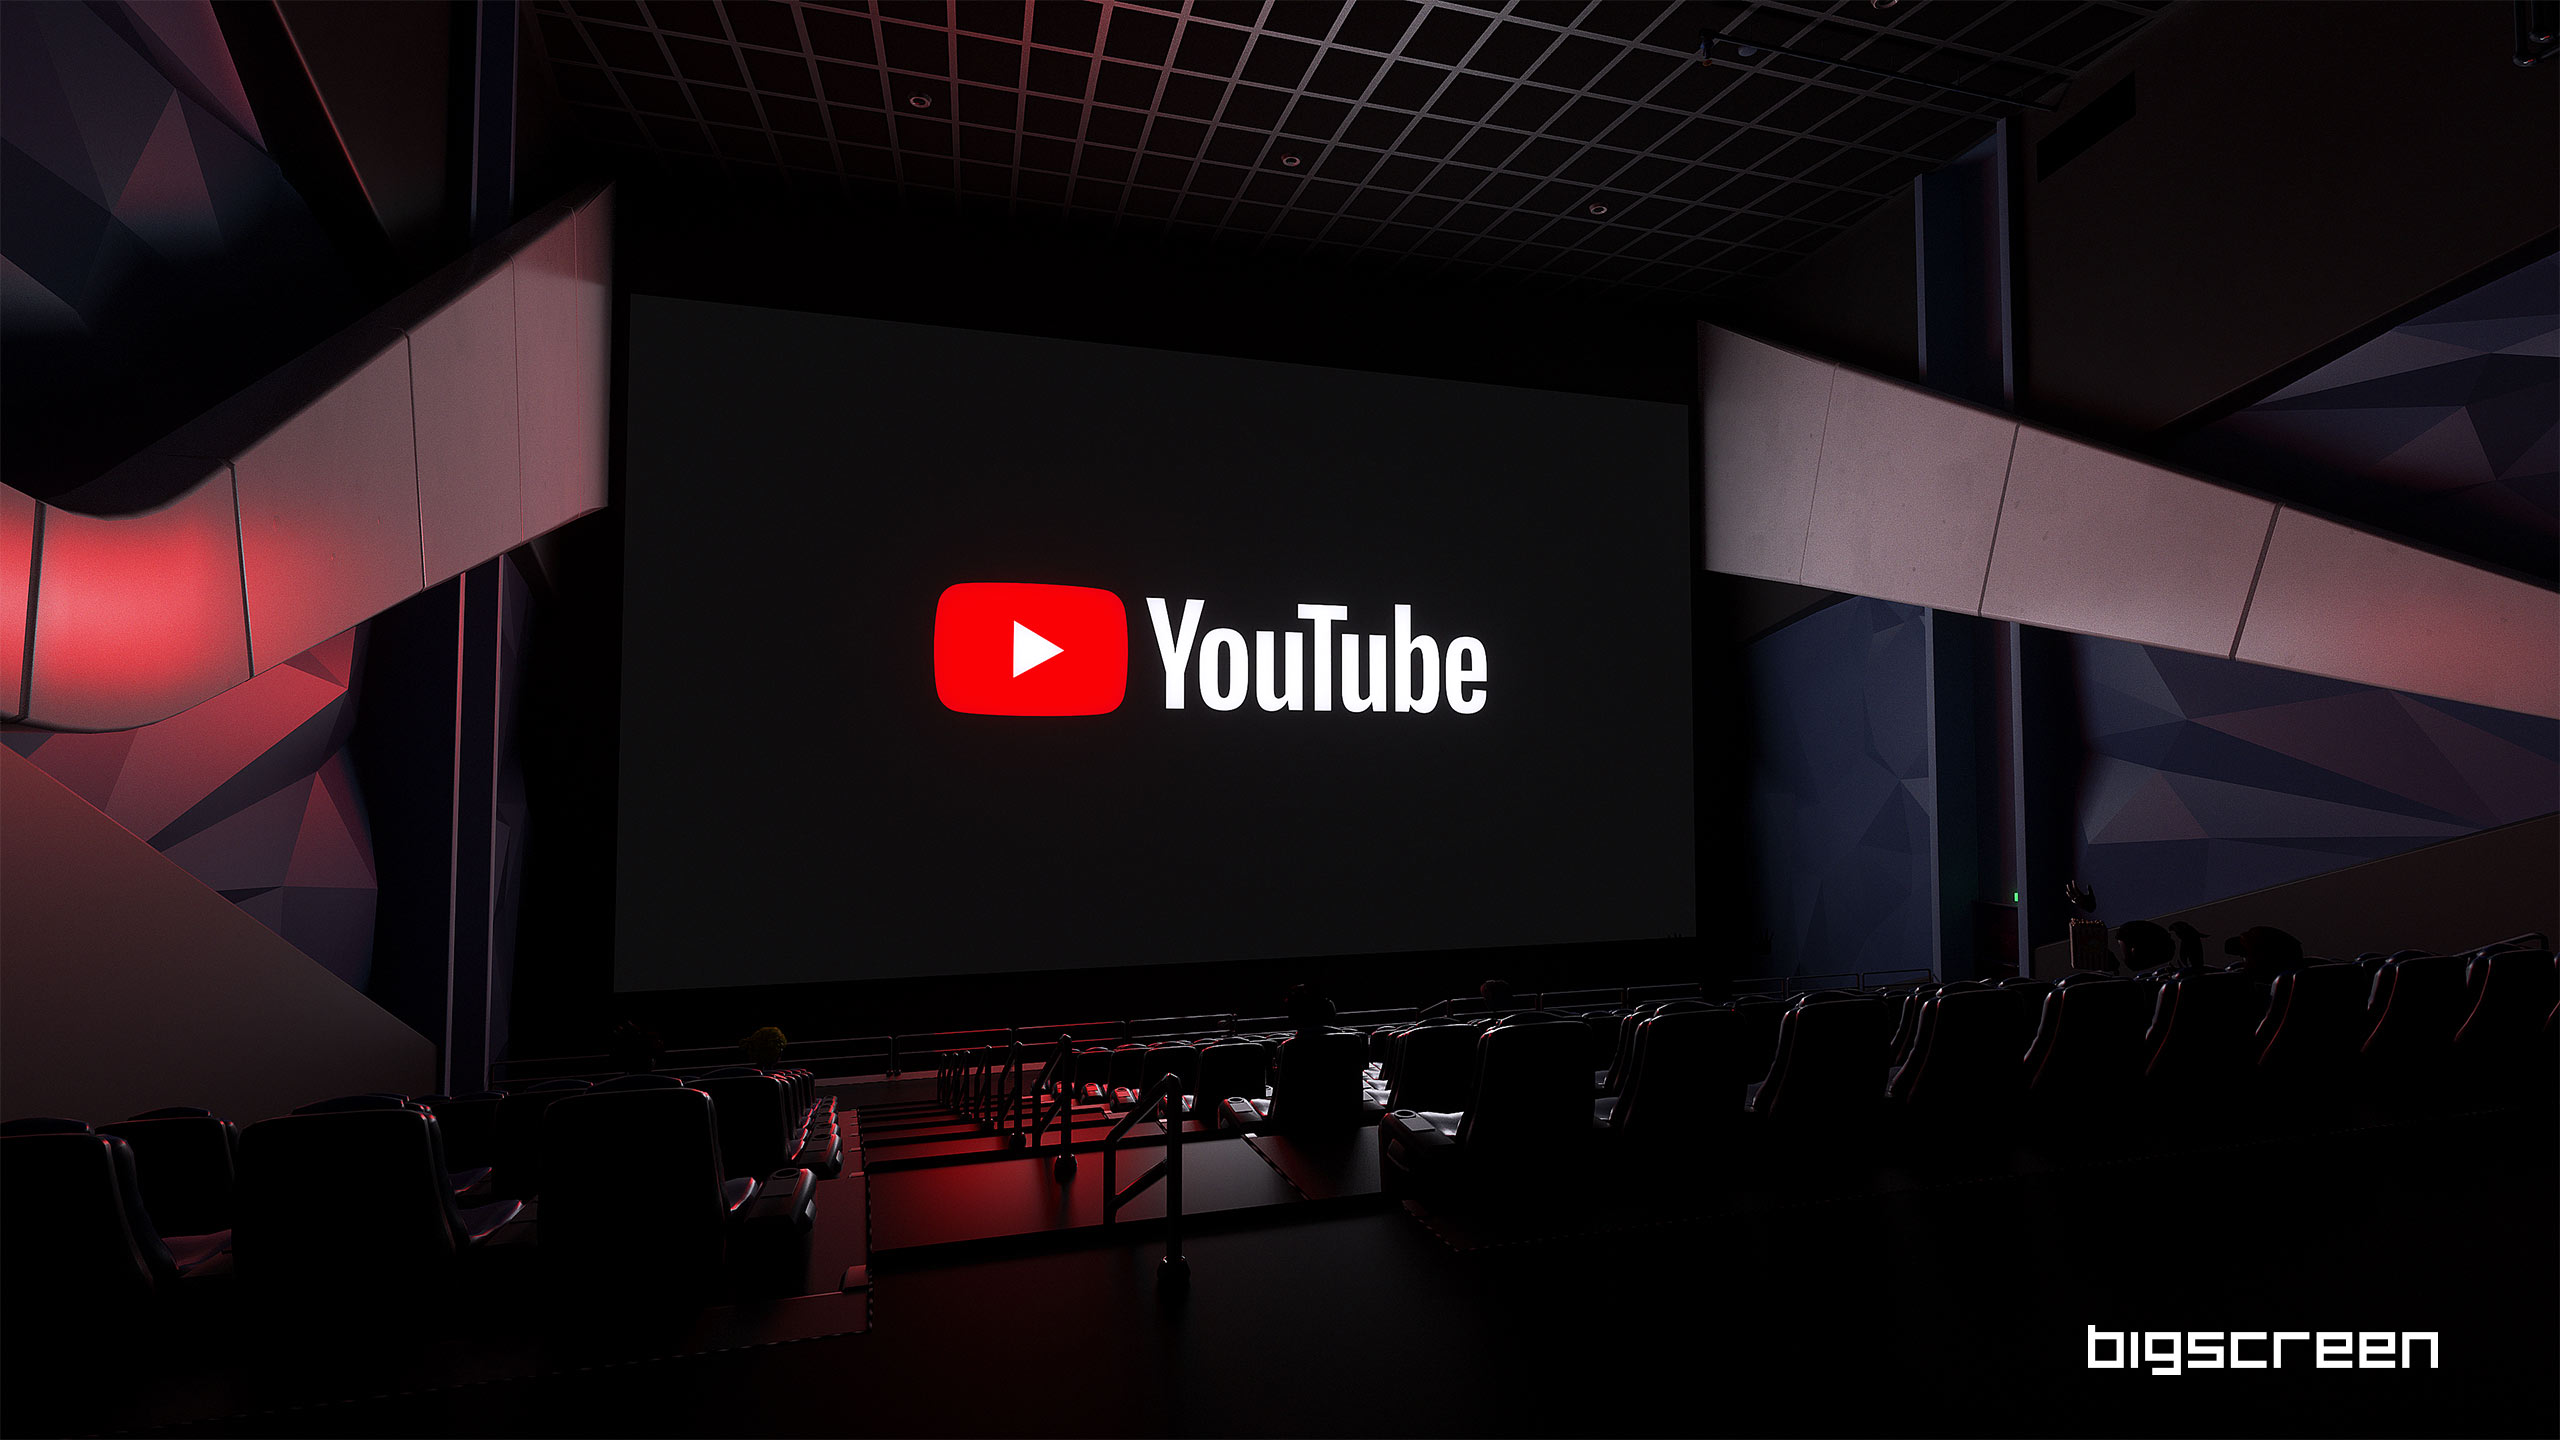 Users Can Now Watch YouTube Together Thanks to 'Bigscreen' Update – Road VR